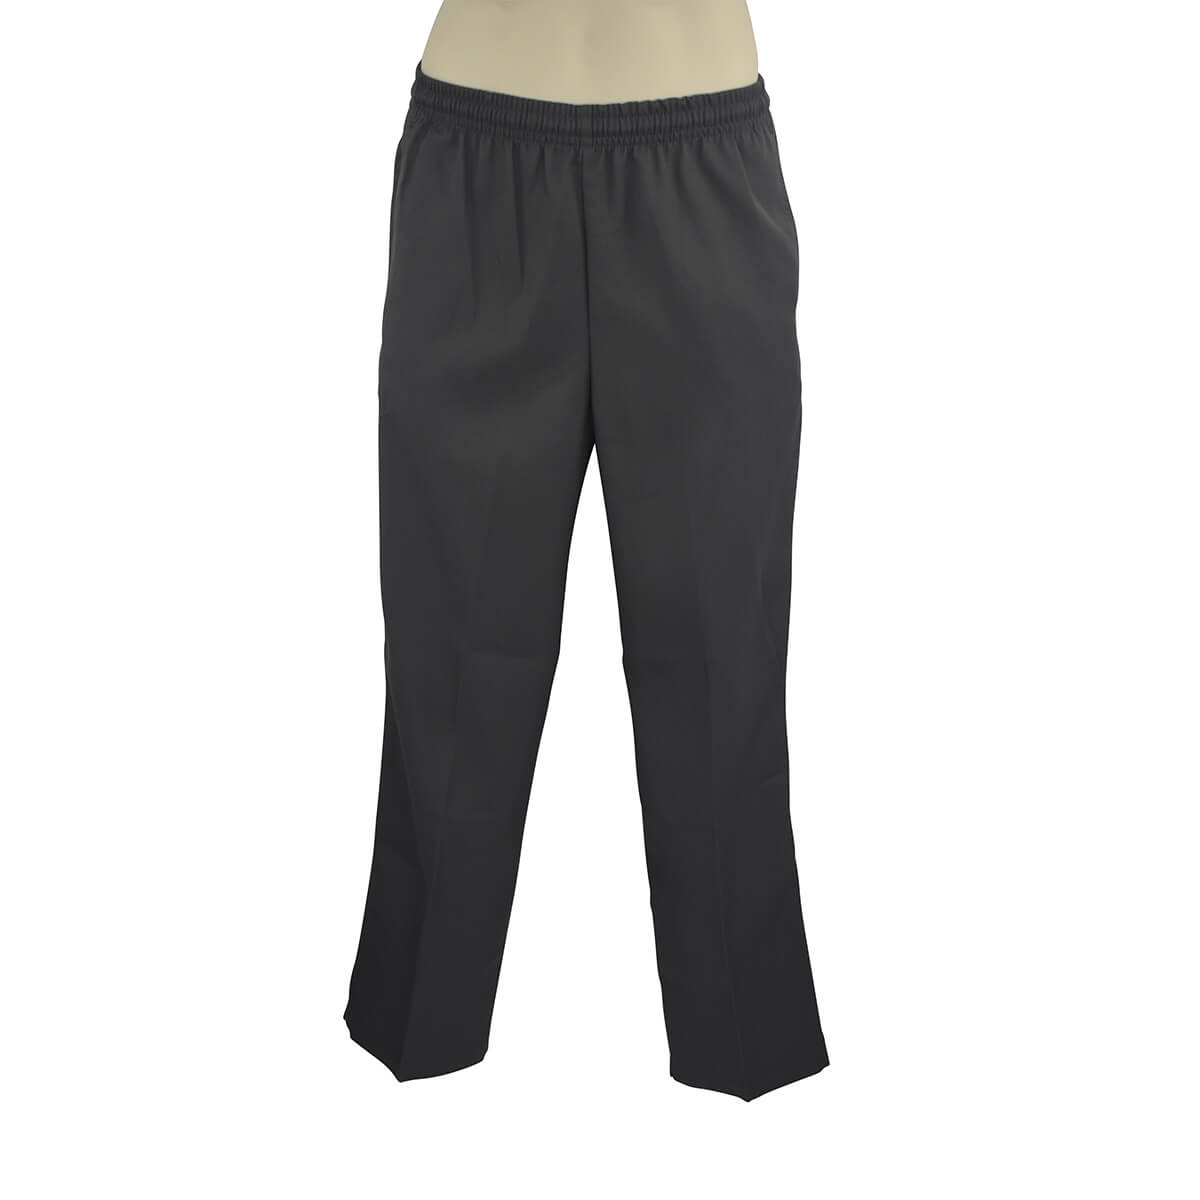 Buy Black Skinny Fit Stretch High Waist School Trousers (9-18yrs) from the  Next UK online shop